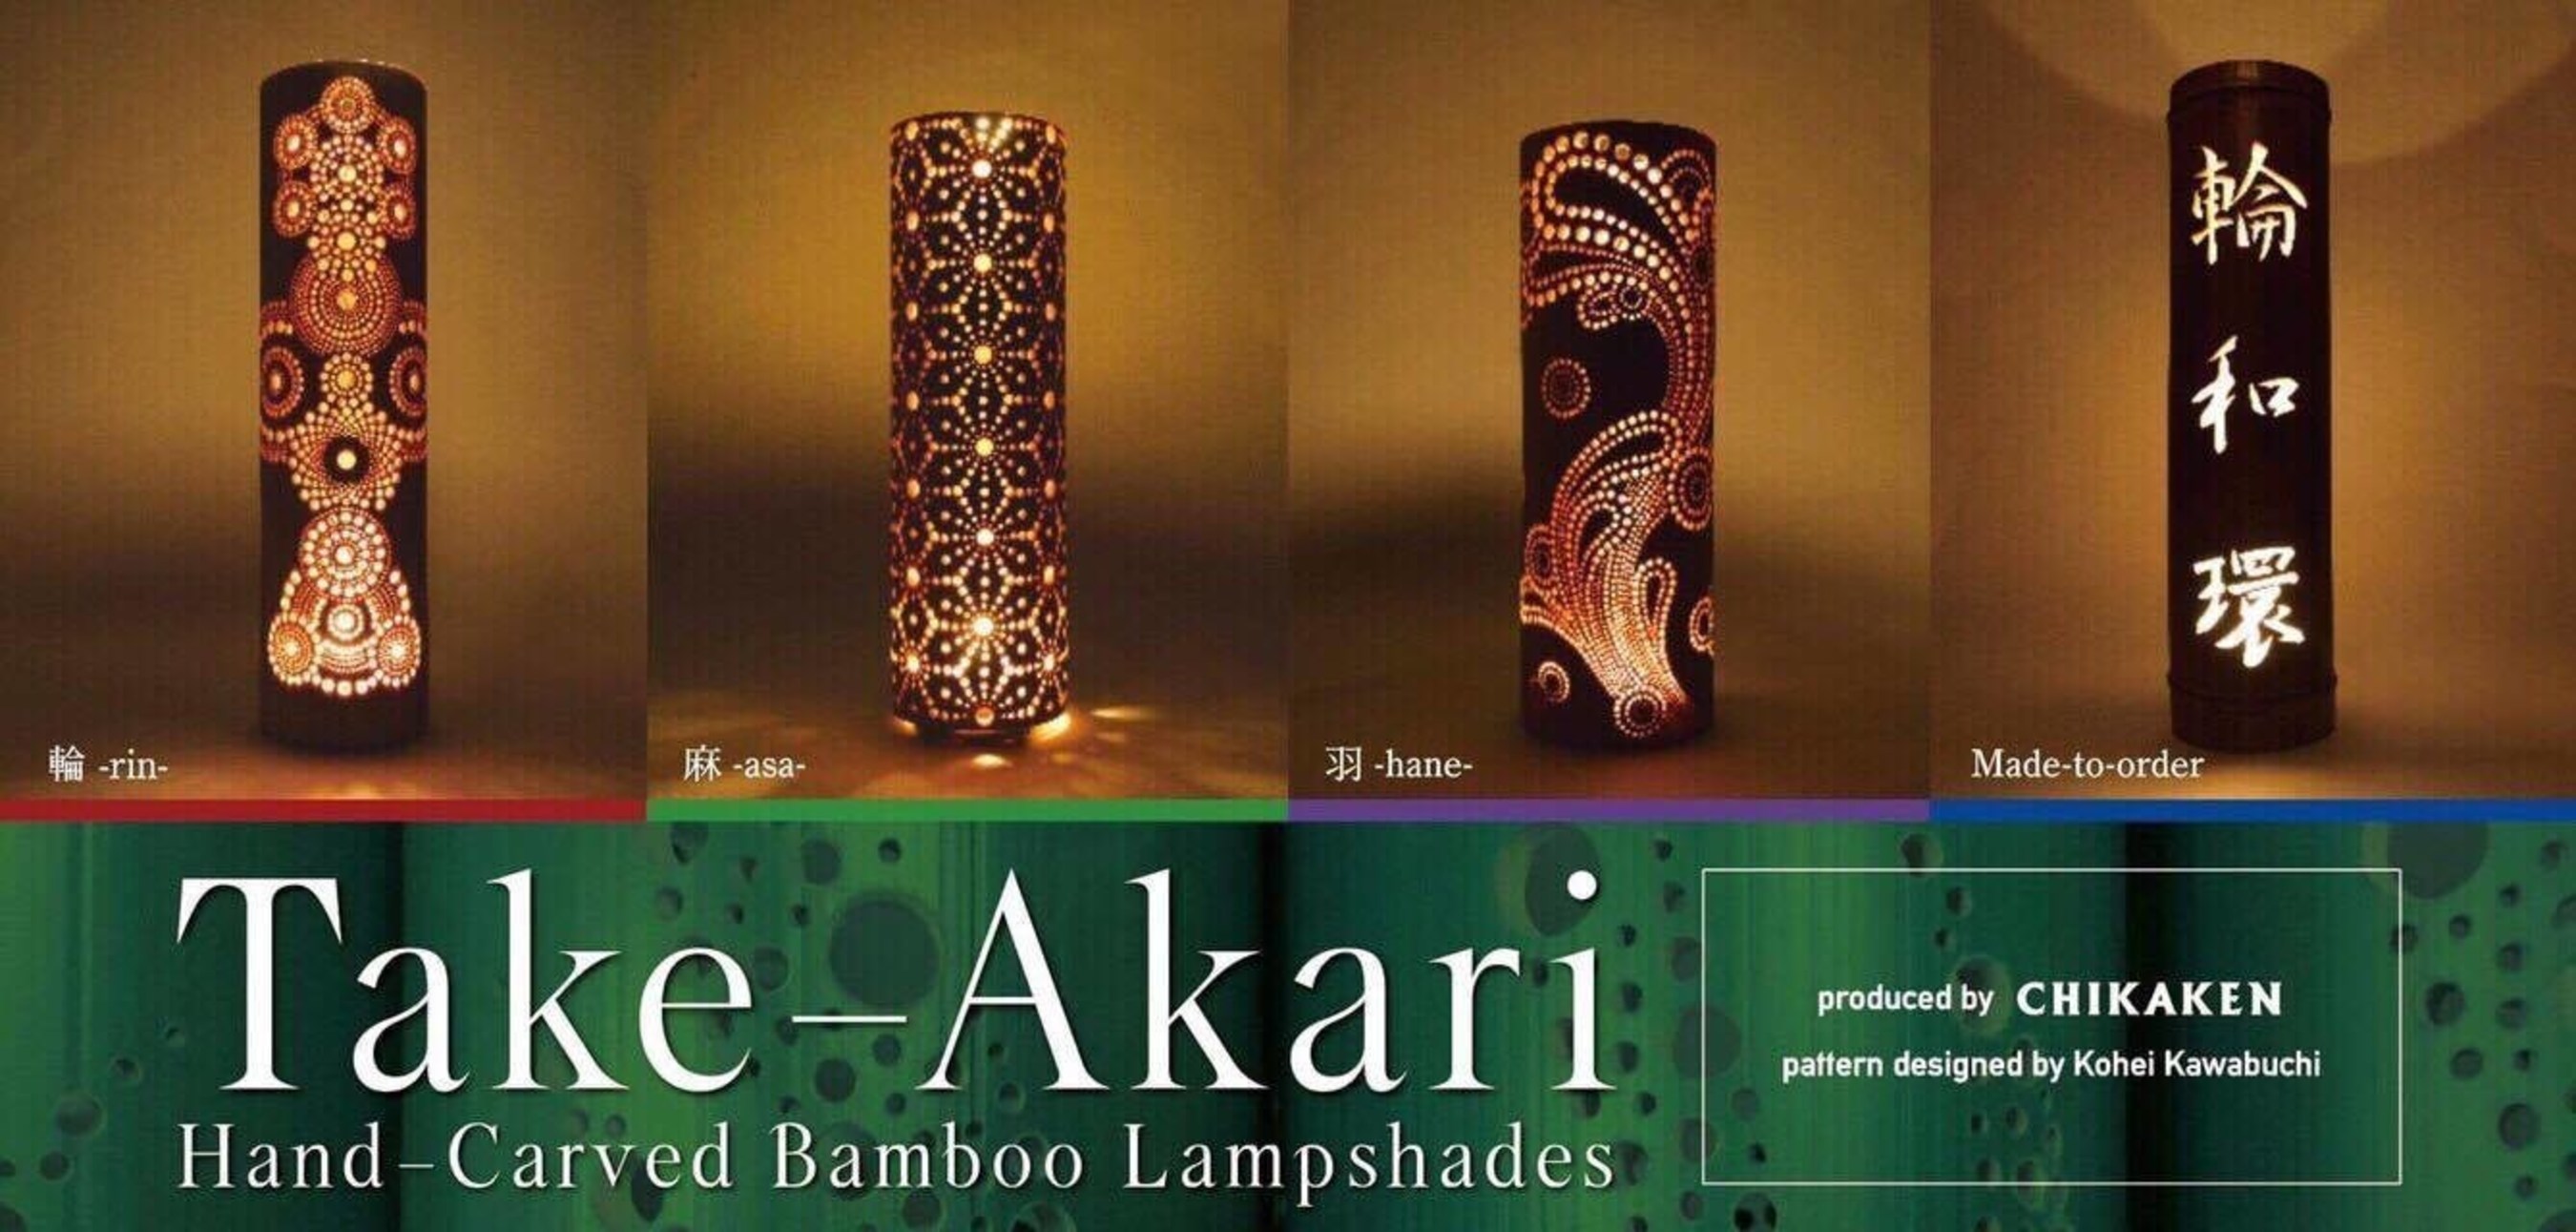 3 Take-Akari designs available for pre-order, or request a custom design.